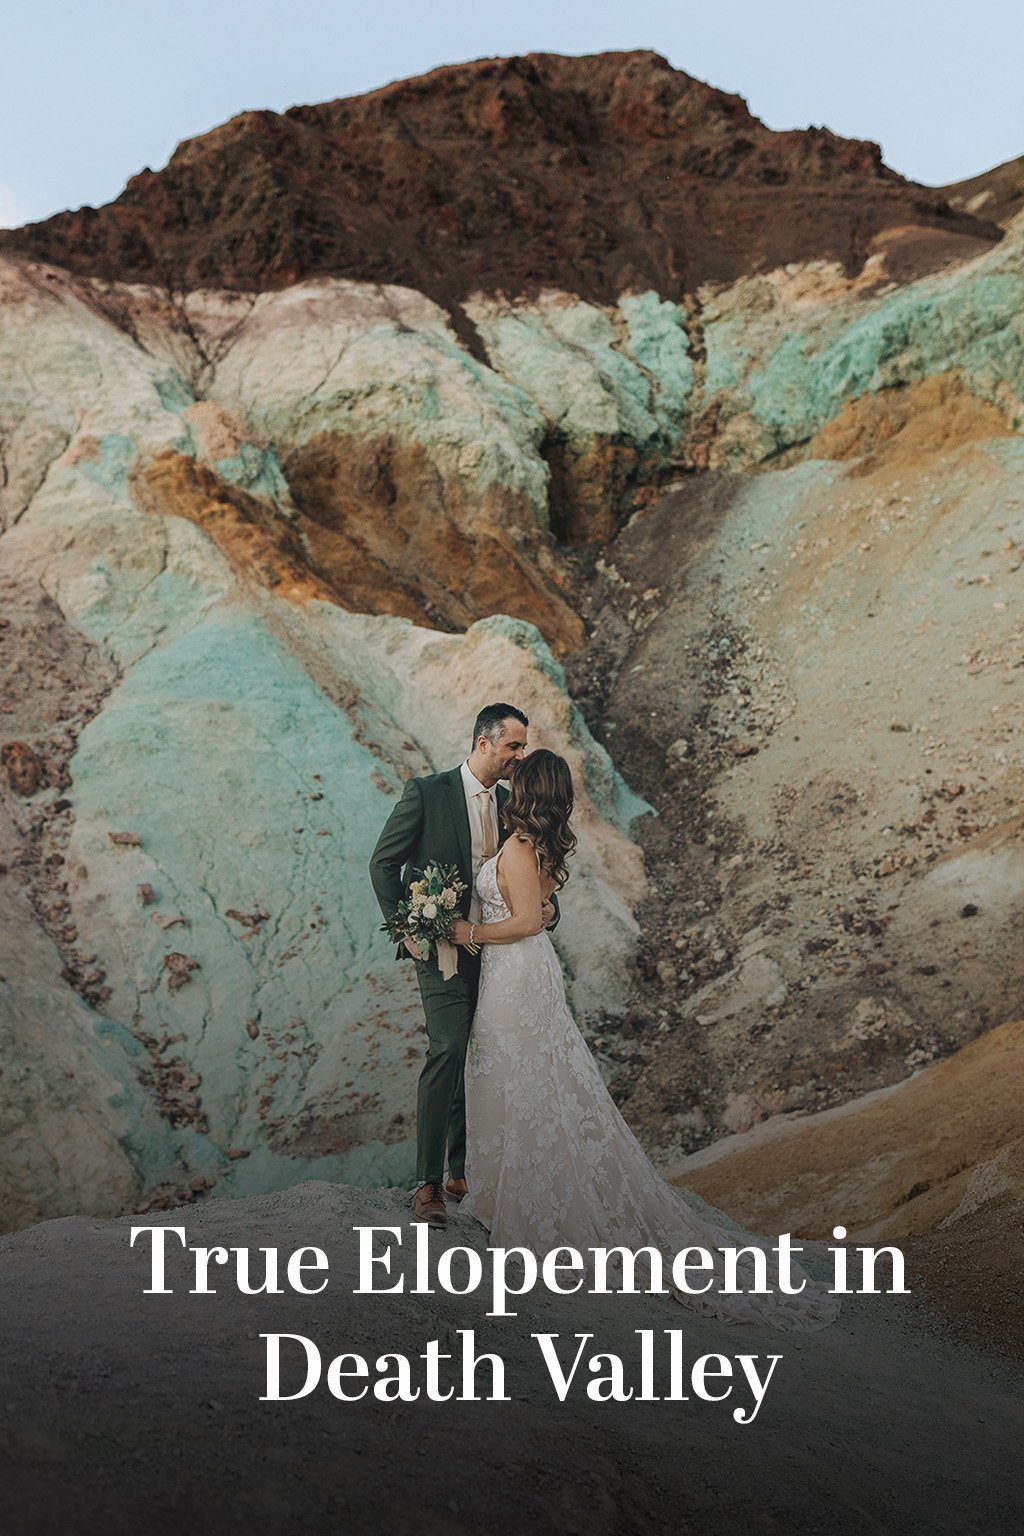 An image of a married couple with the text "True Elopement in Death Valley"